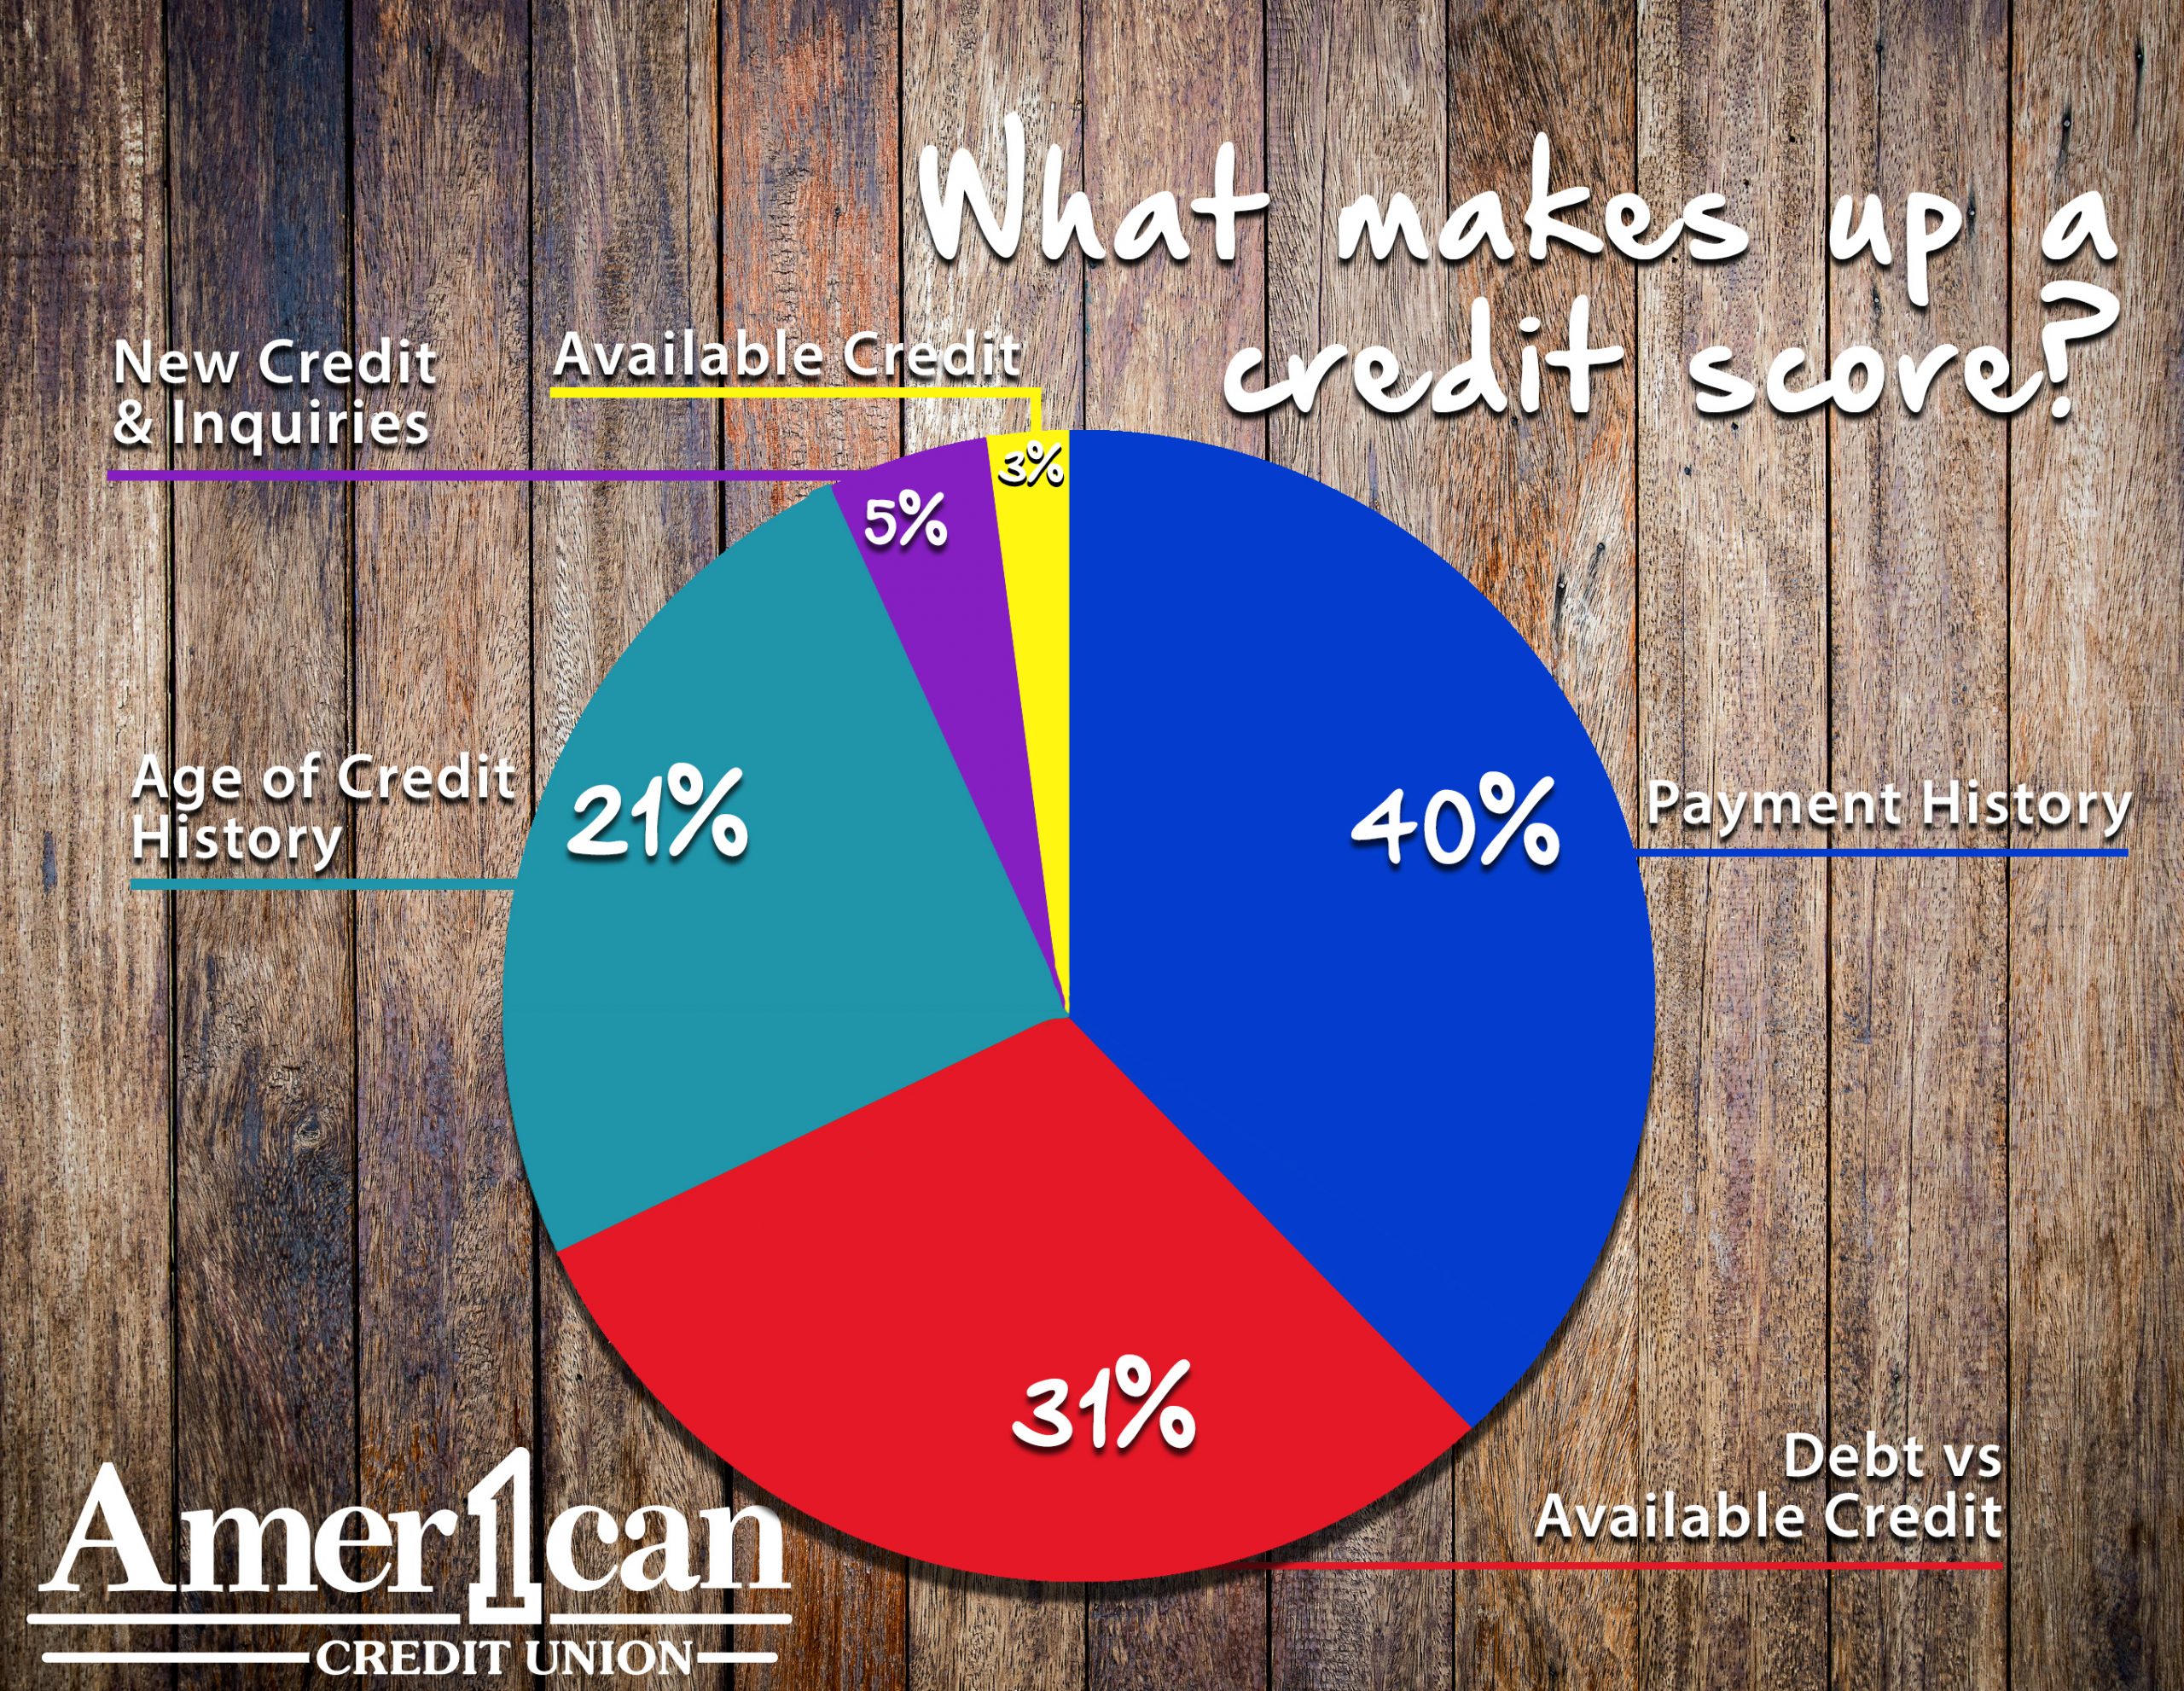 What Goes Into a Credit Score?